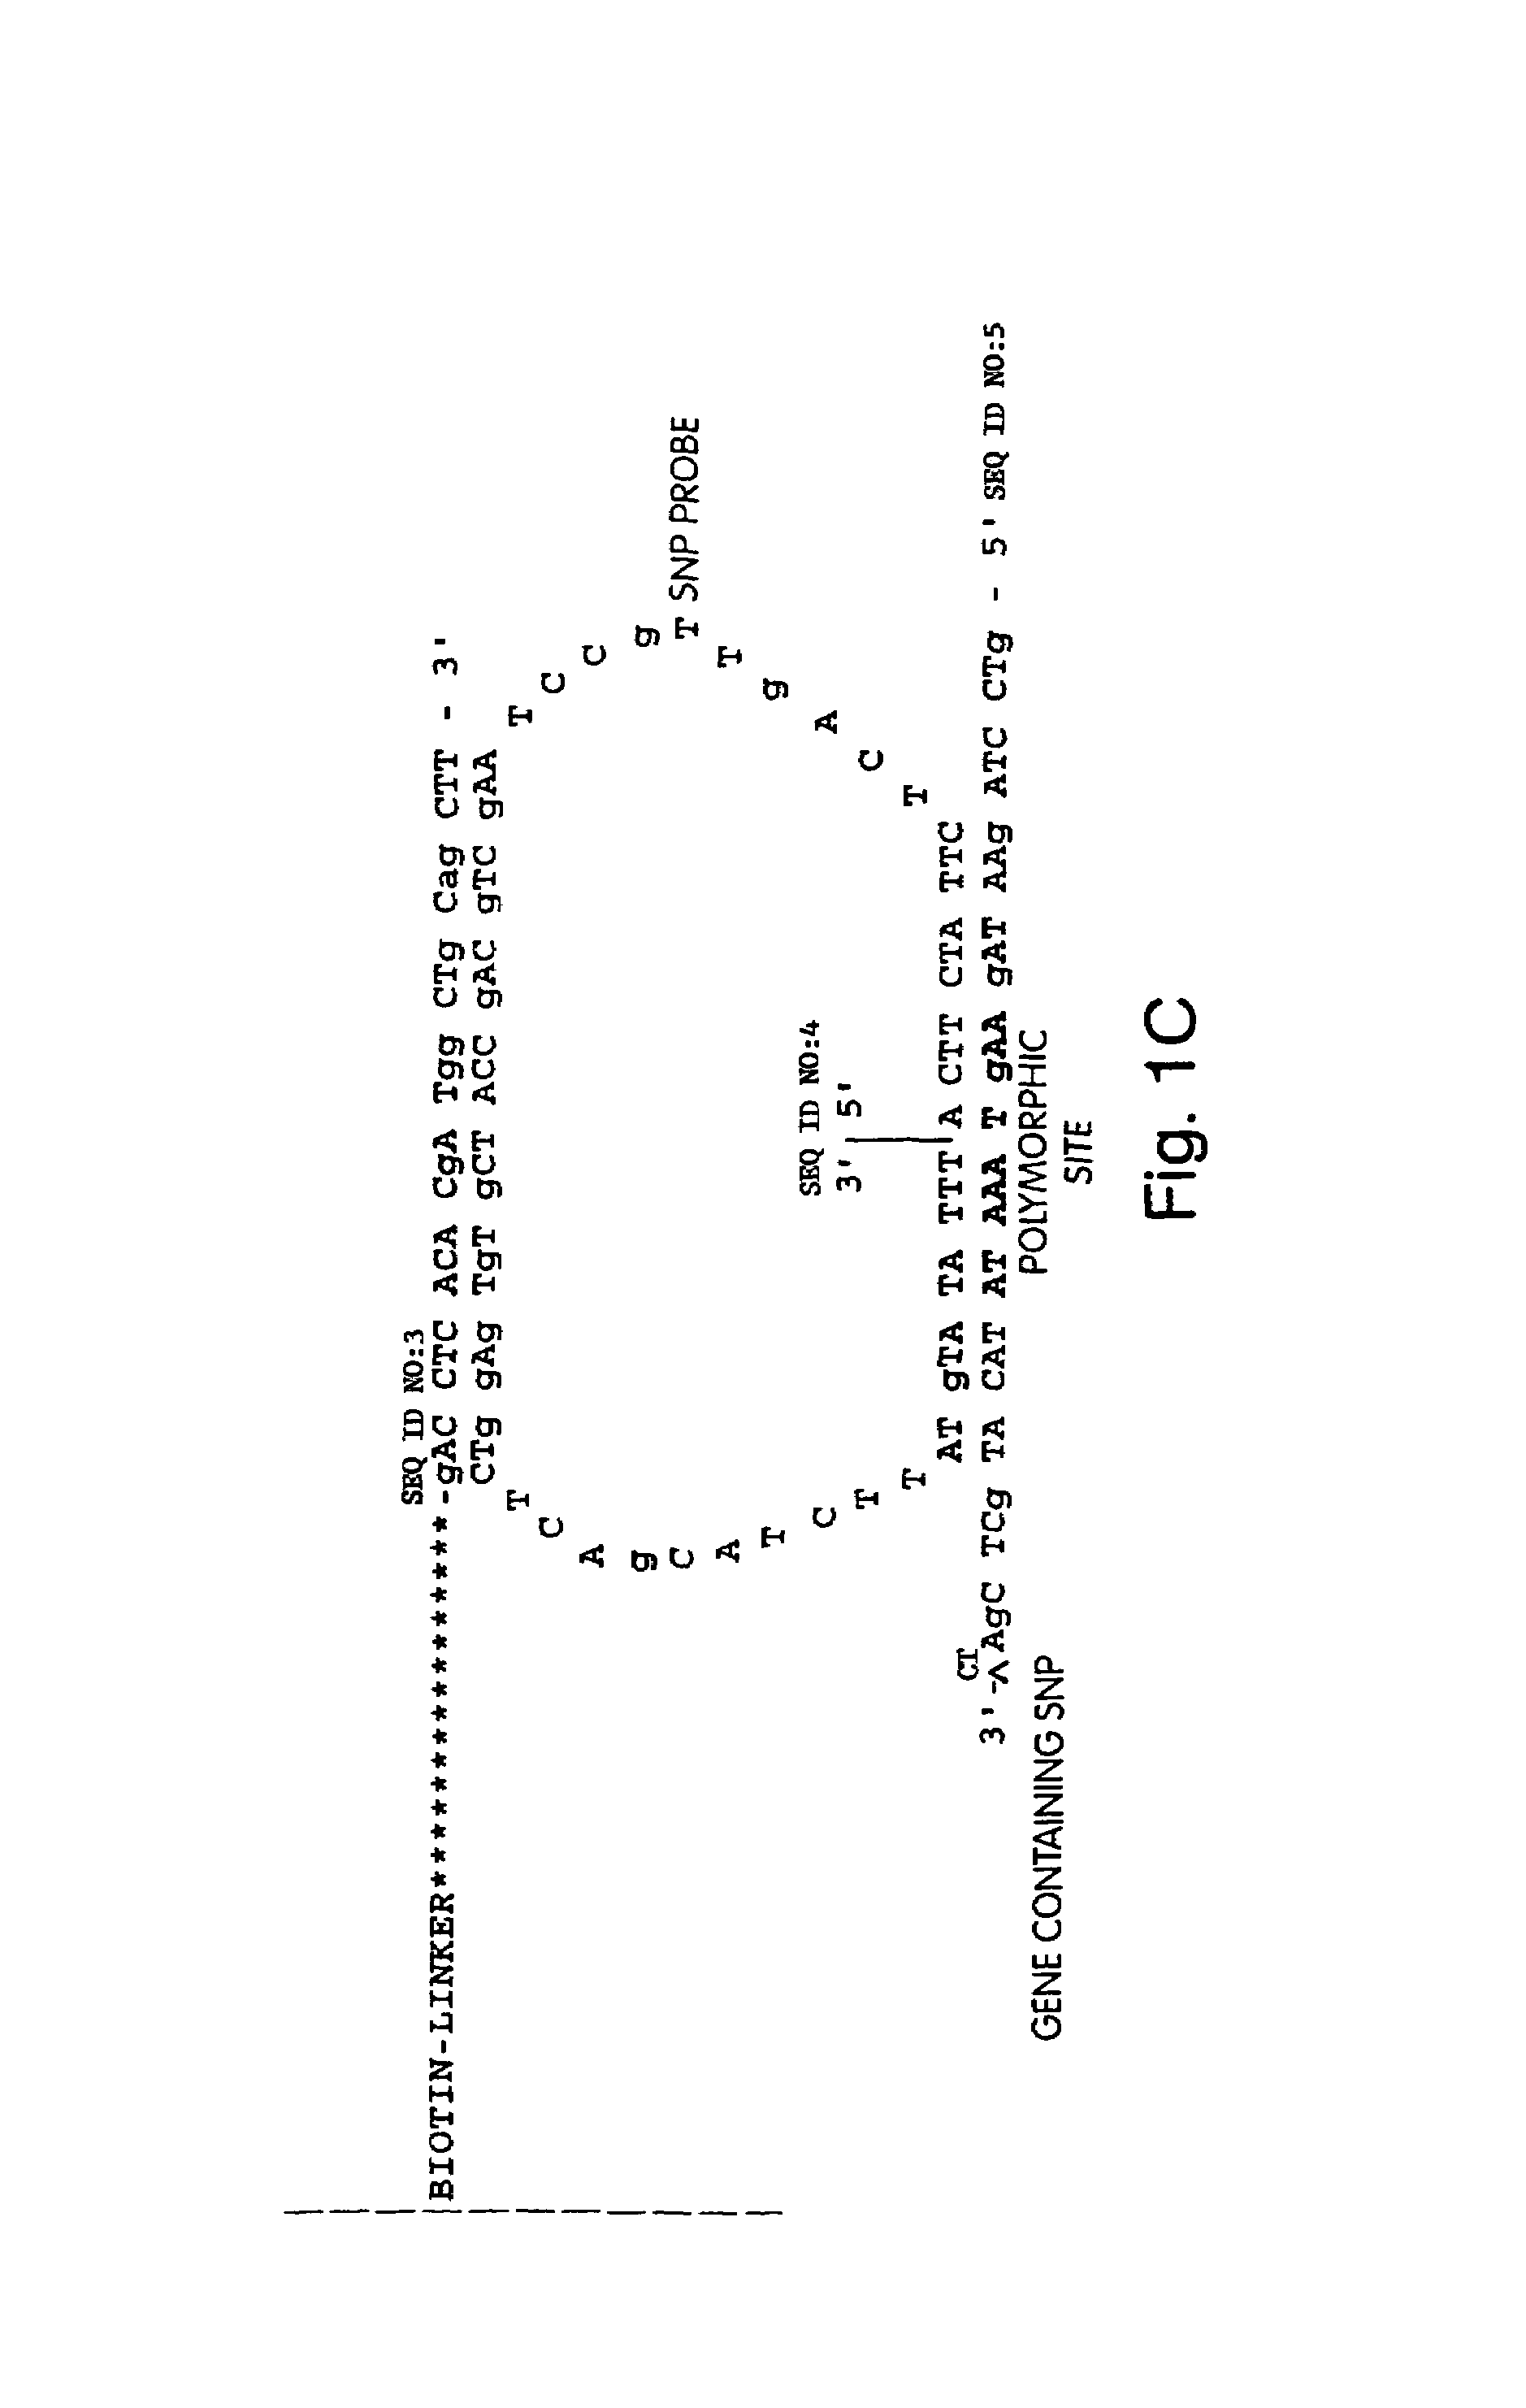 Method of sequencing a nucleic acid